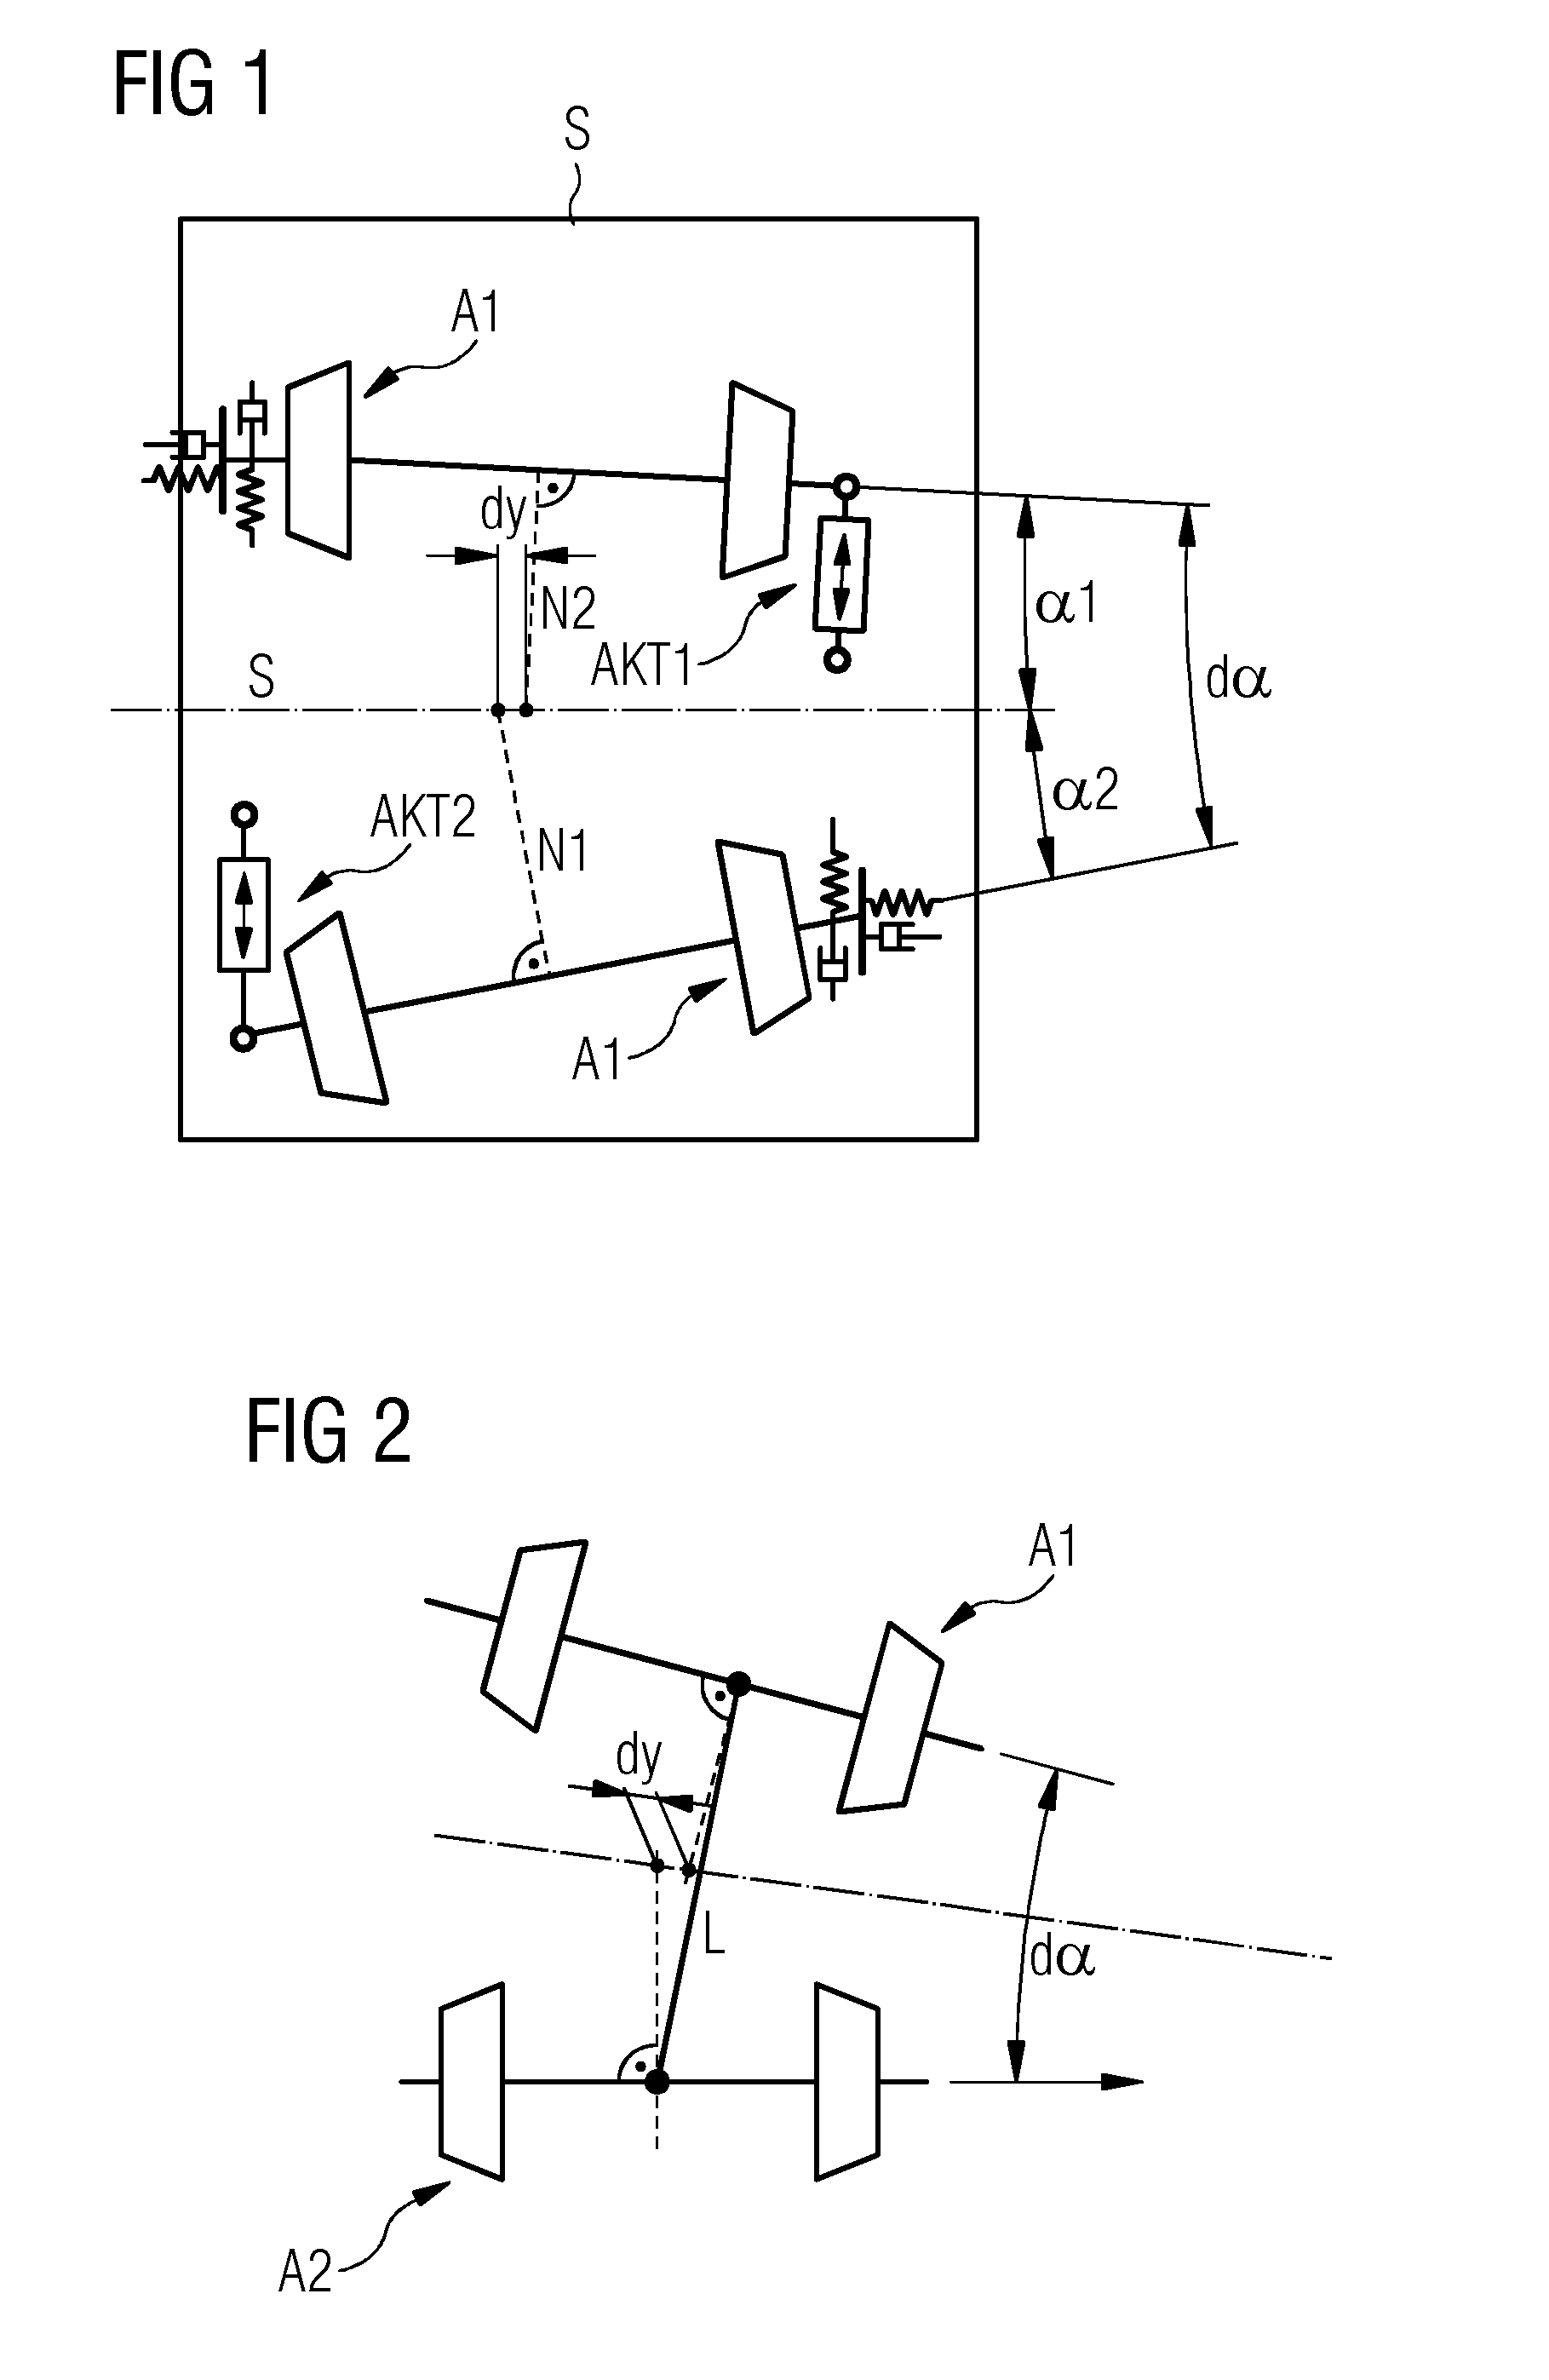 Rail vehicle with variable axial geometry